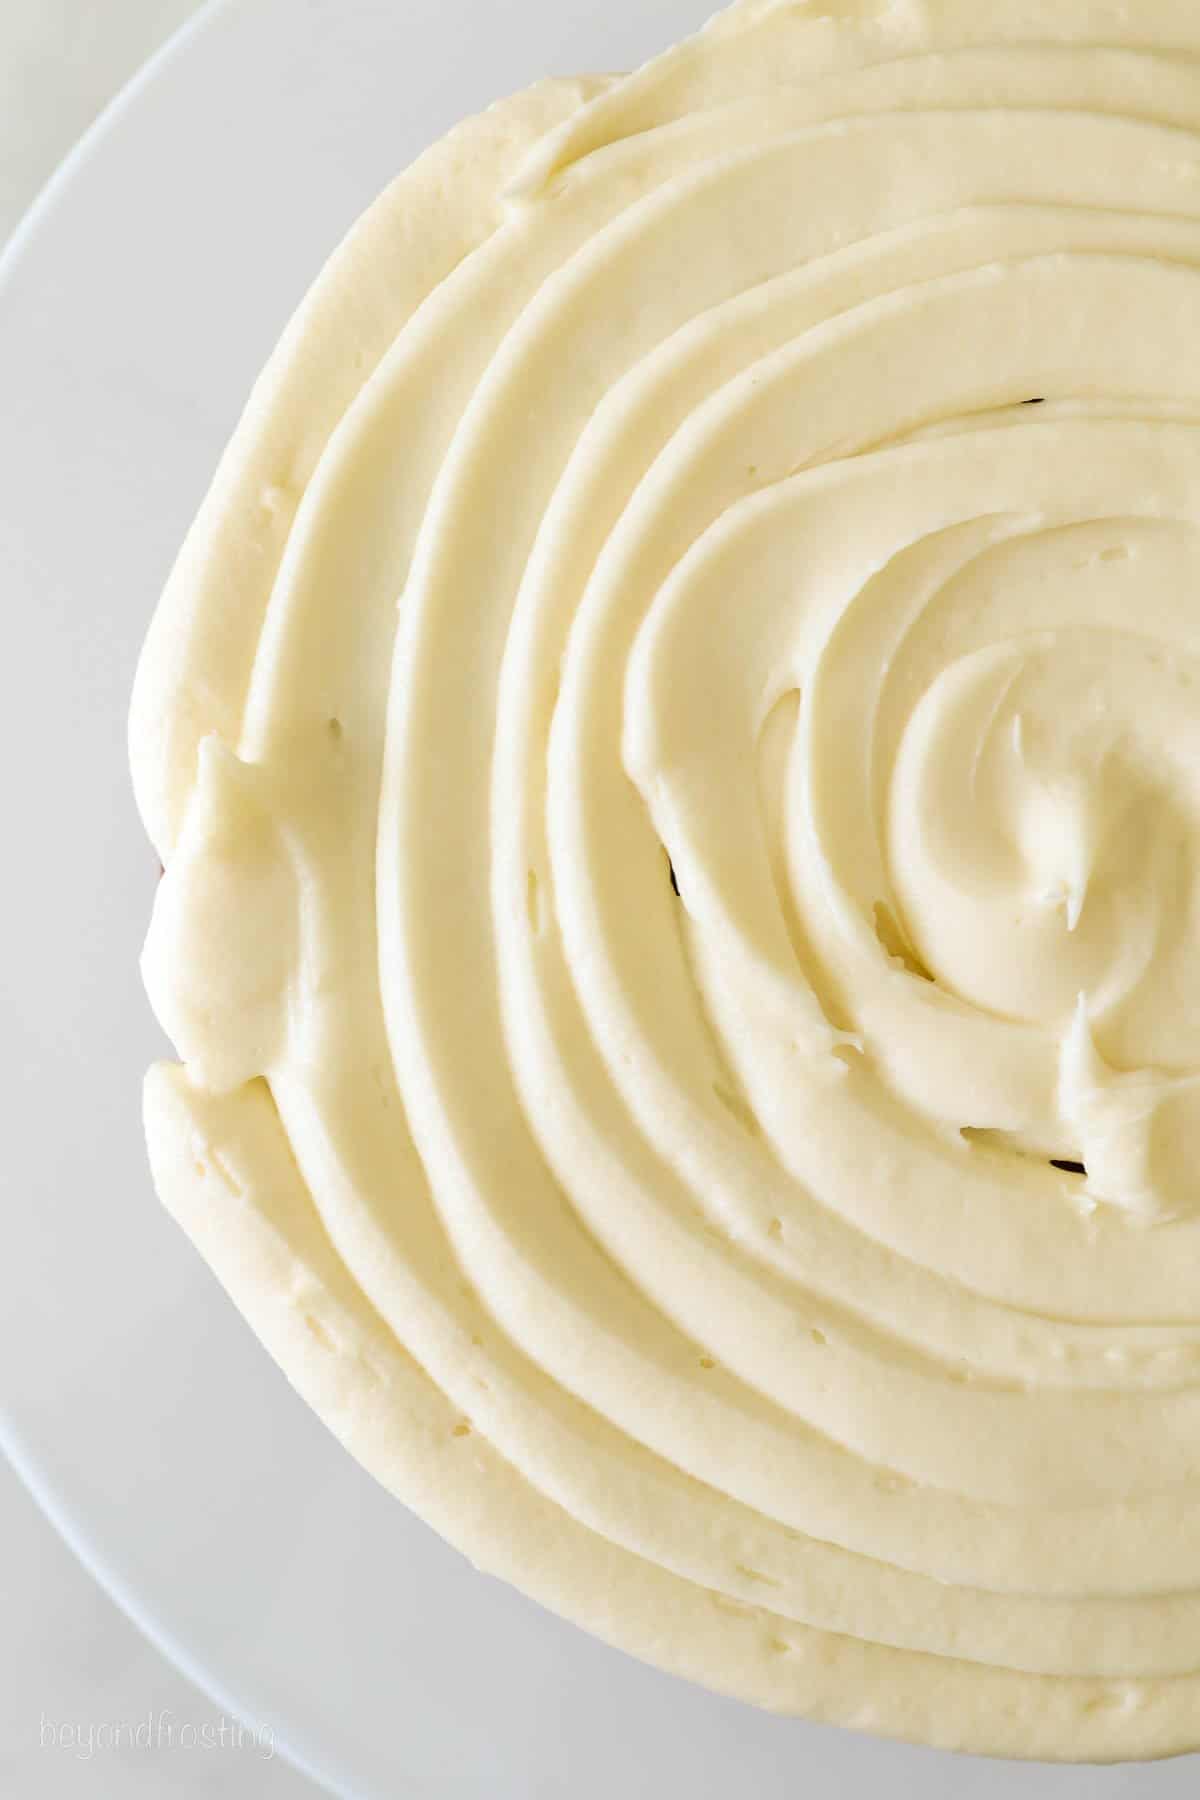 A circle of cream cheese frosting